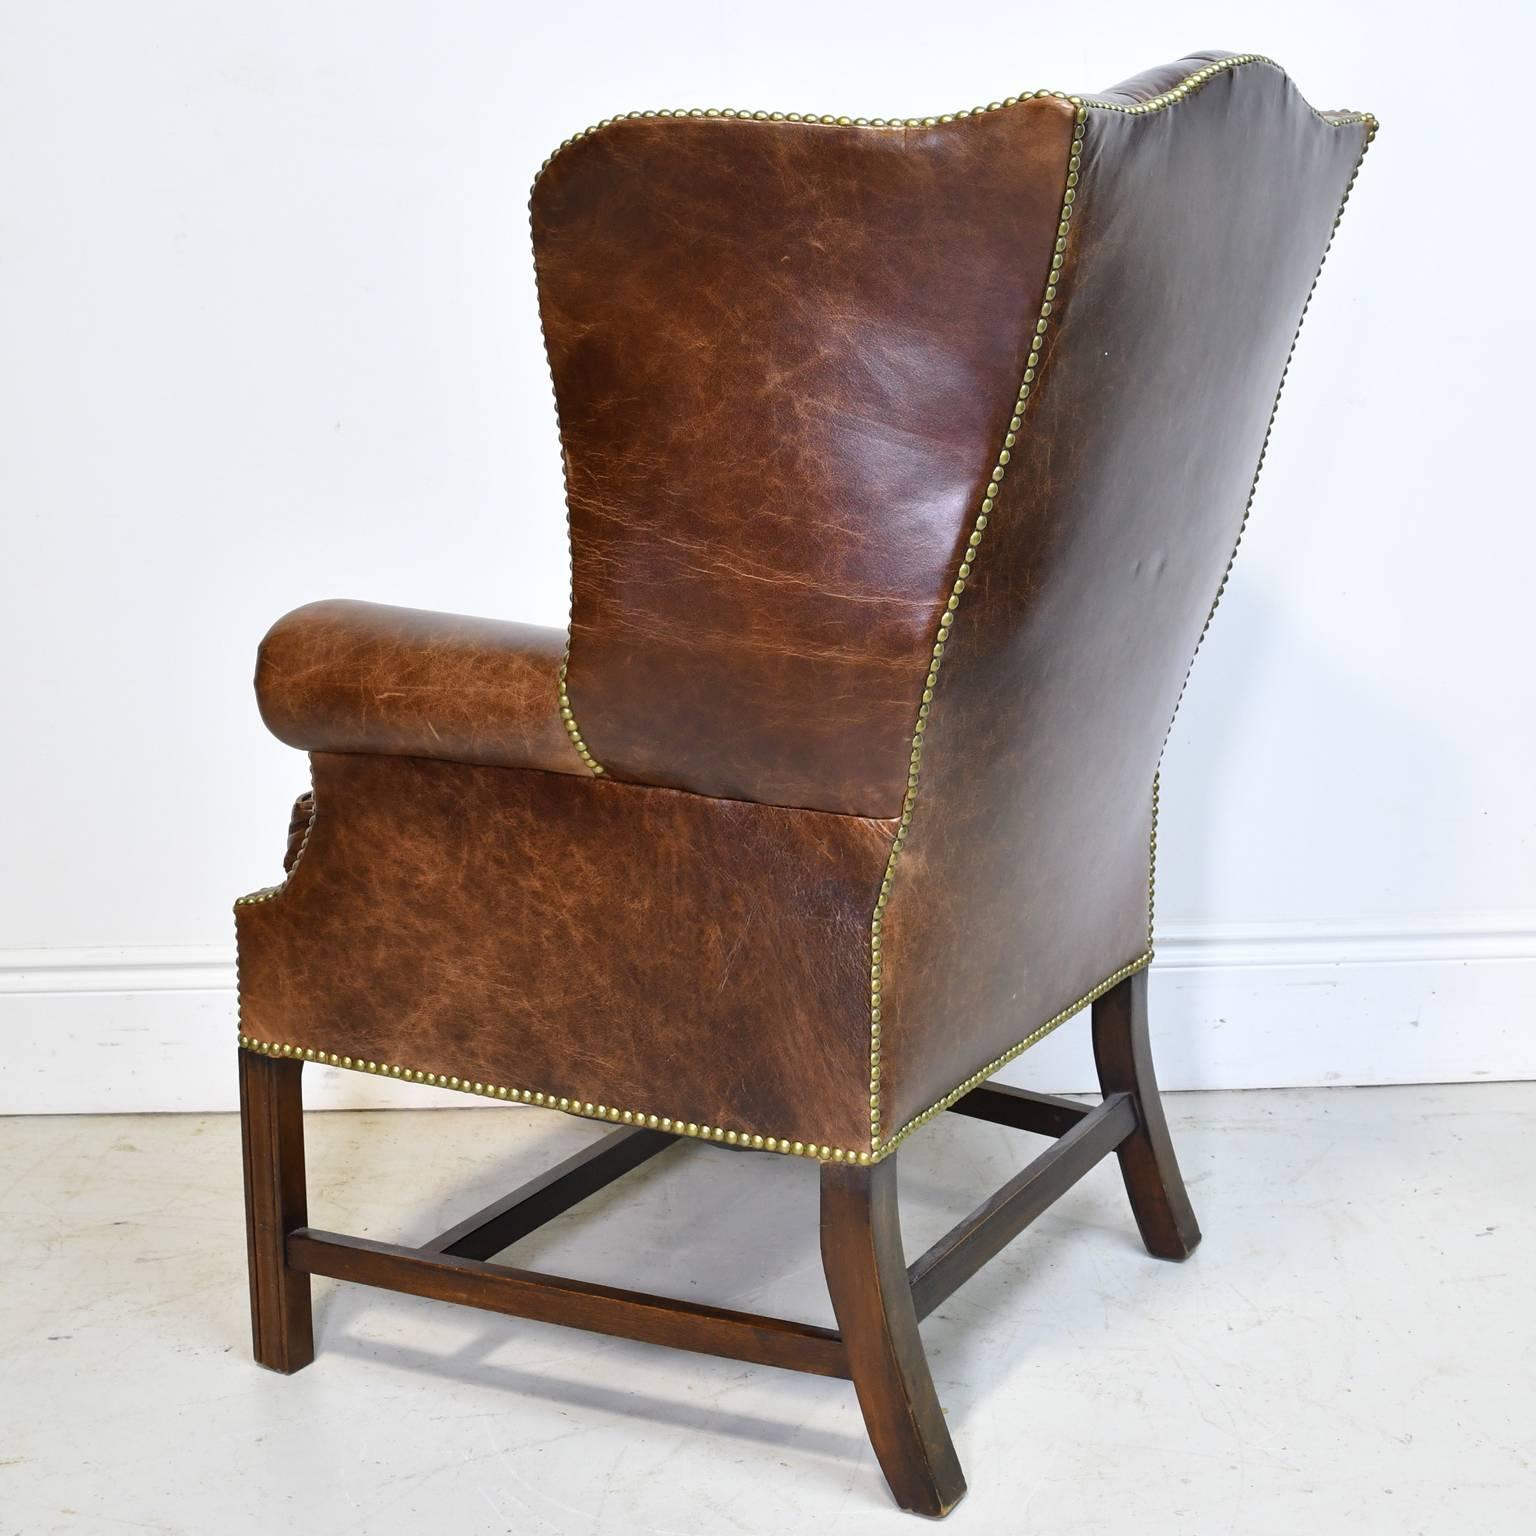 Carved Vintage Chesterfield Wing-Back Chair with Tufted Brown Leather 